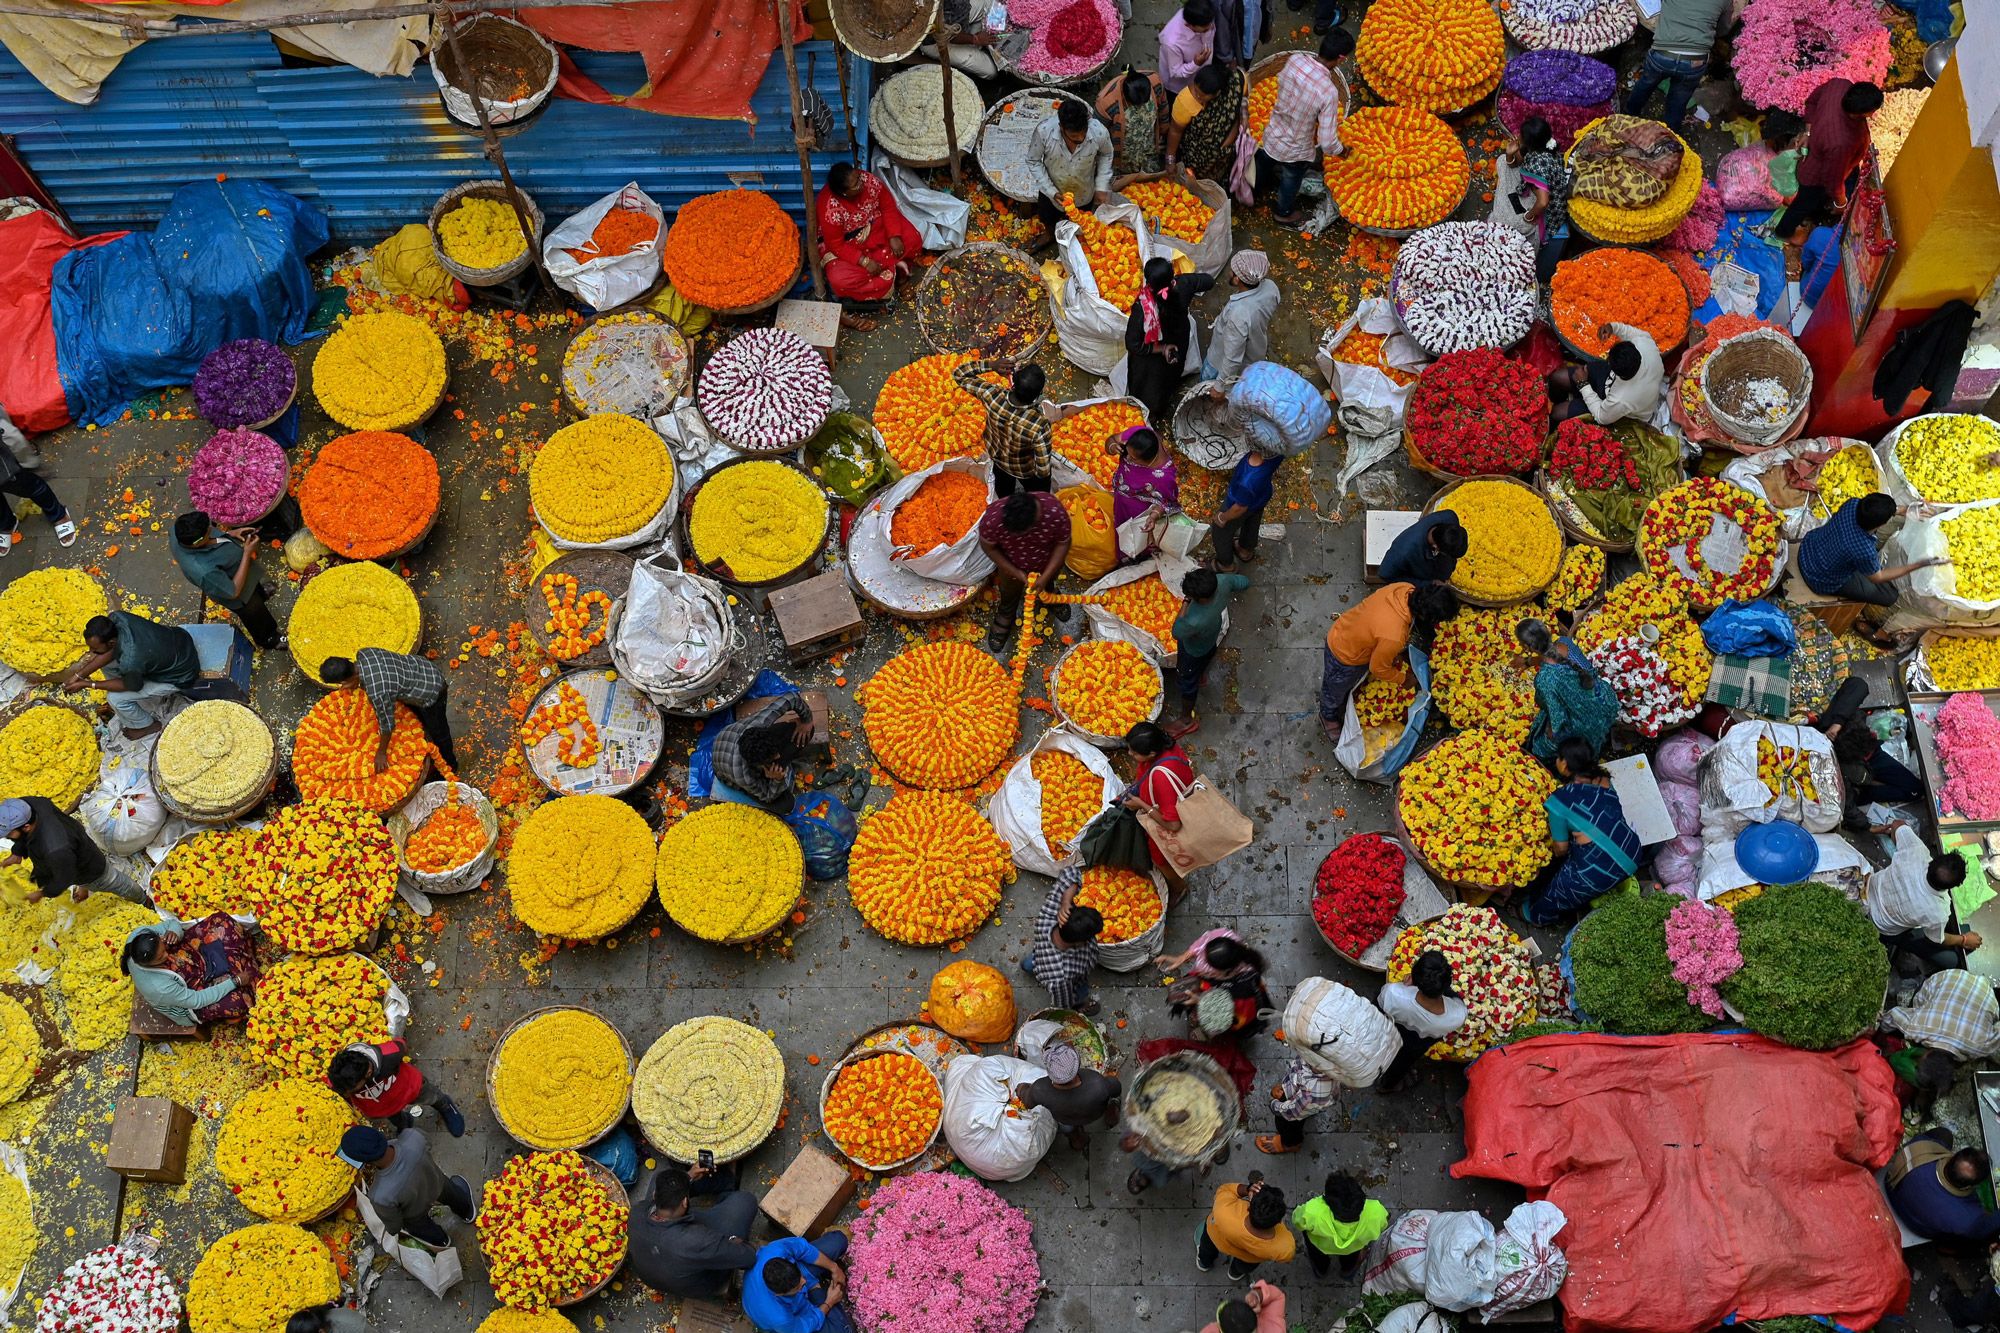 TOPSHOT - People crowd at a flower market on the eve of Diwali, the Hindu festival of lights, in Bangalore on October 23, 2022. (Photo by Manjunath KIRAN / AFP) (Photo by MANJUNATH KIRAN/AFP via Getty Images)